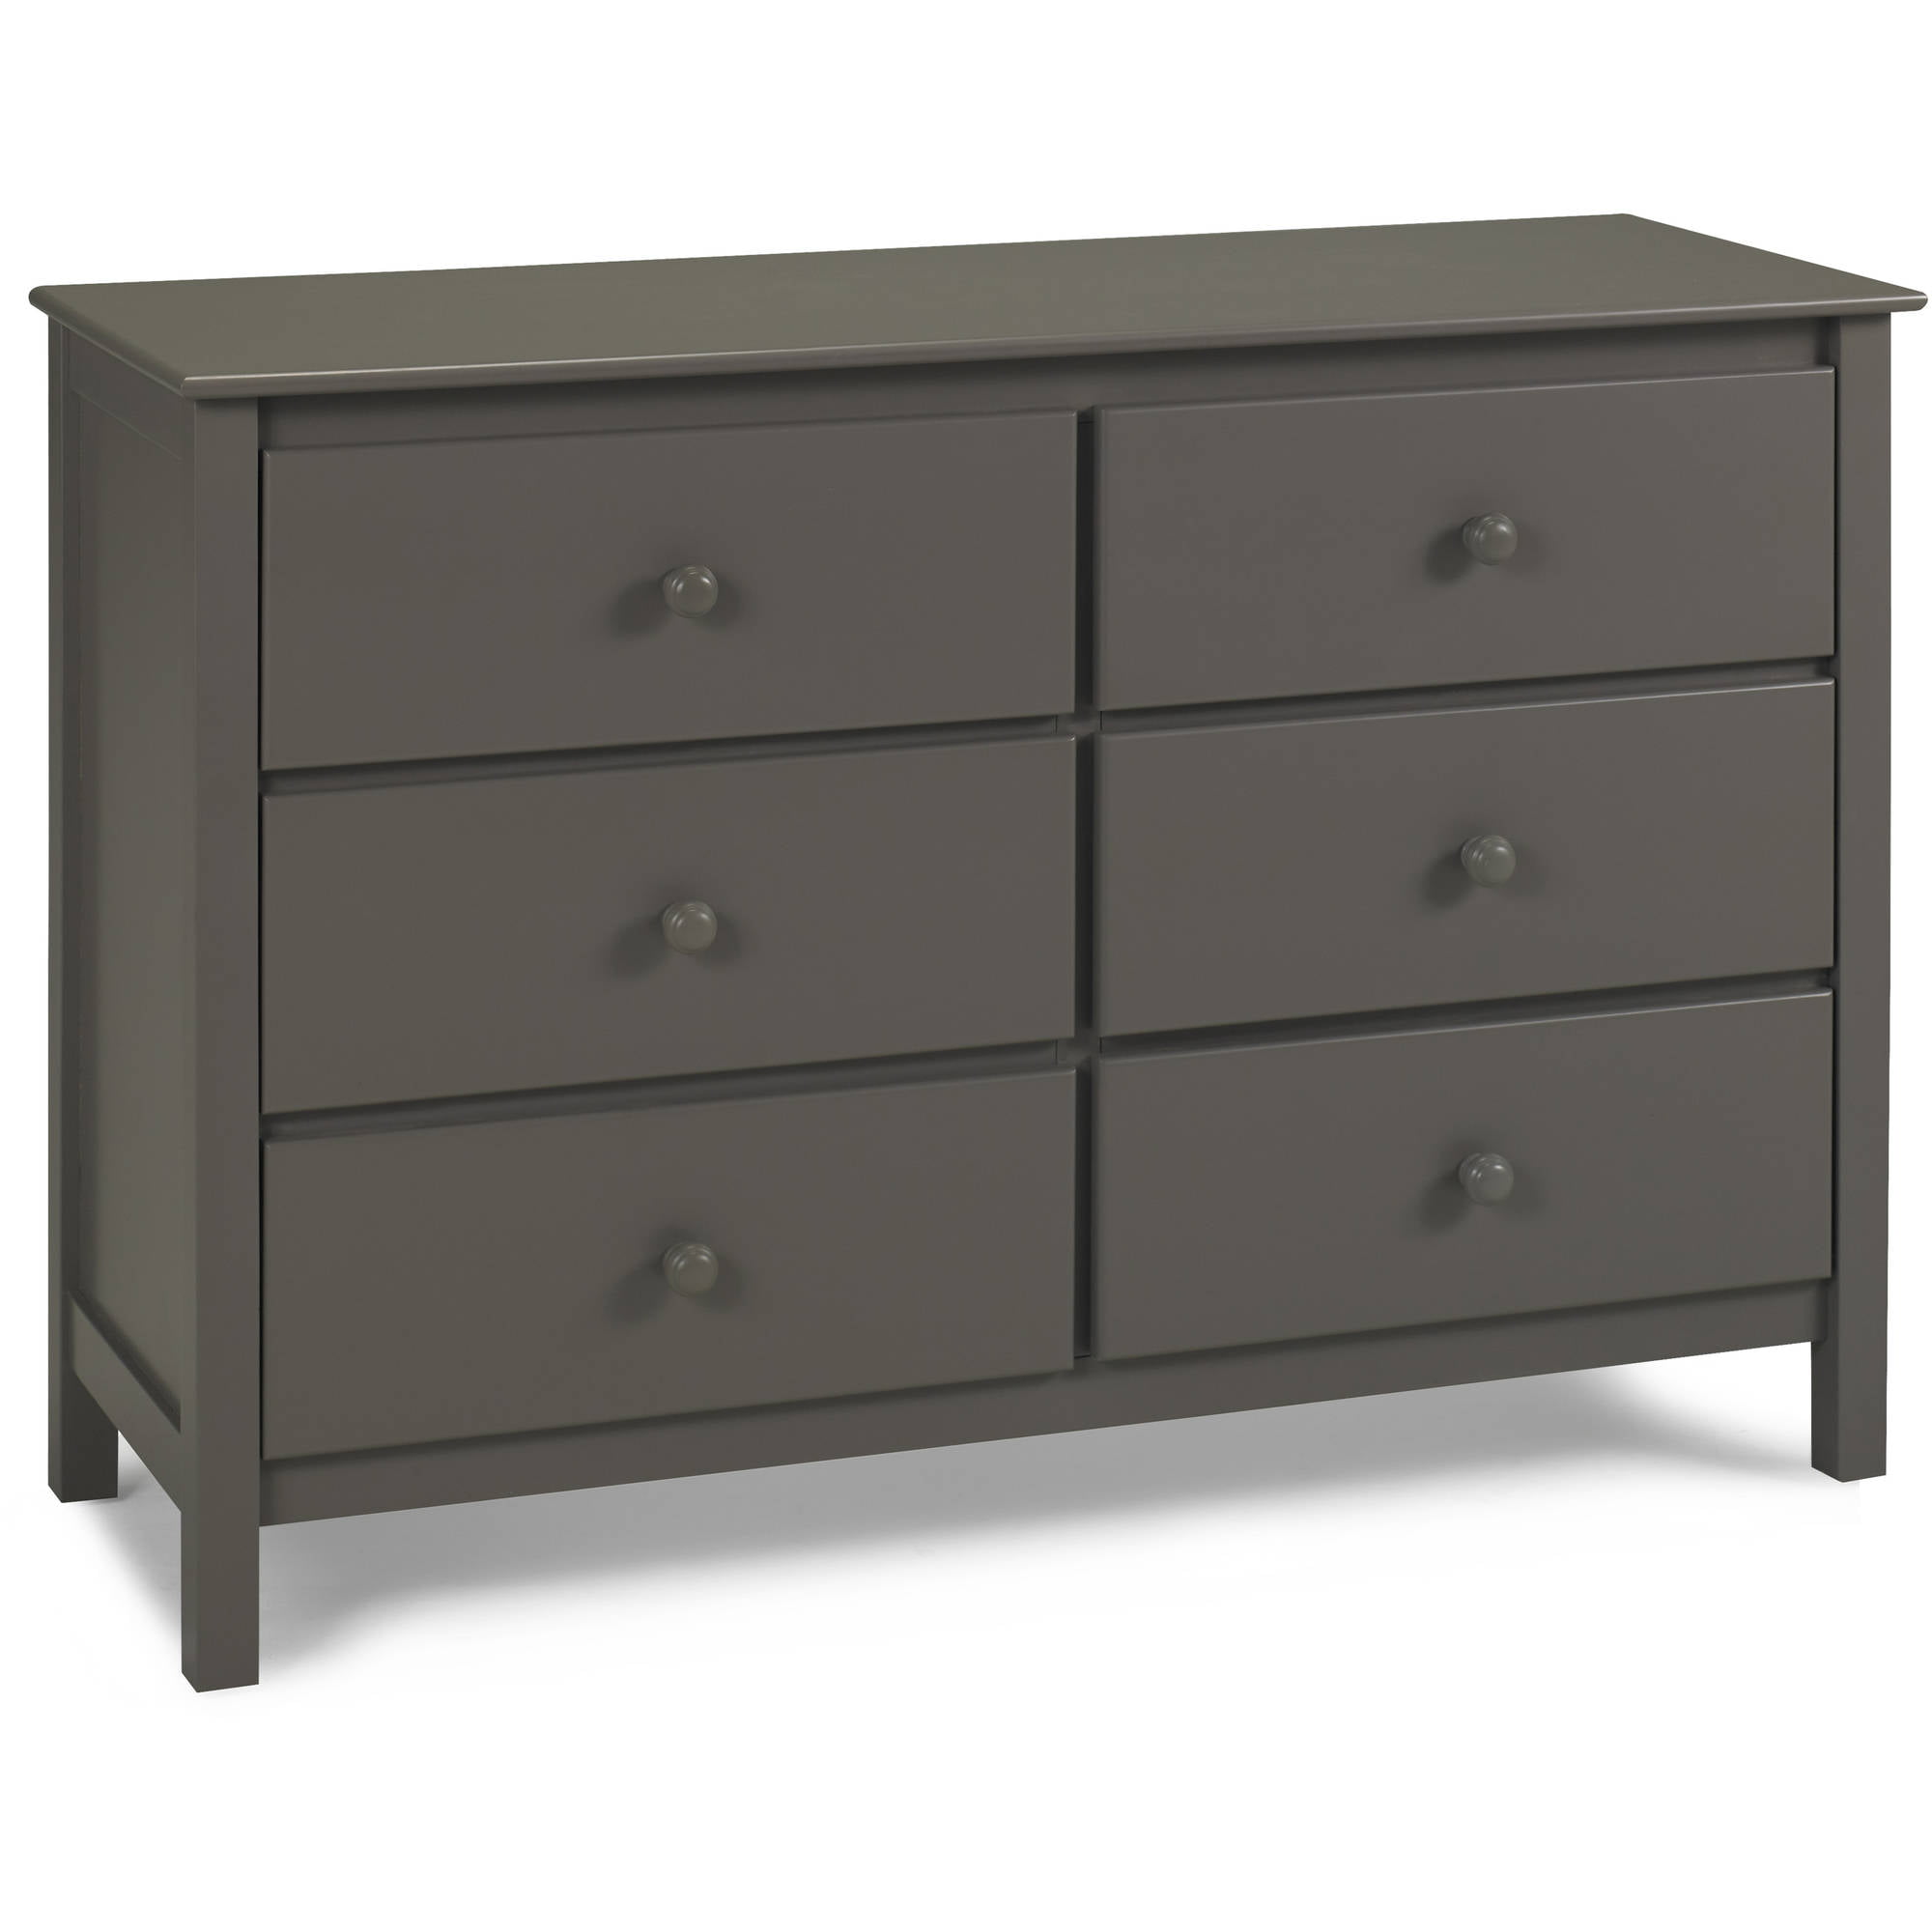 Fisher Price 6 Drawer Double Dresser Choose Your Finish Walmart